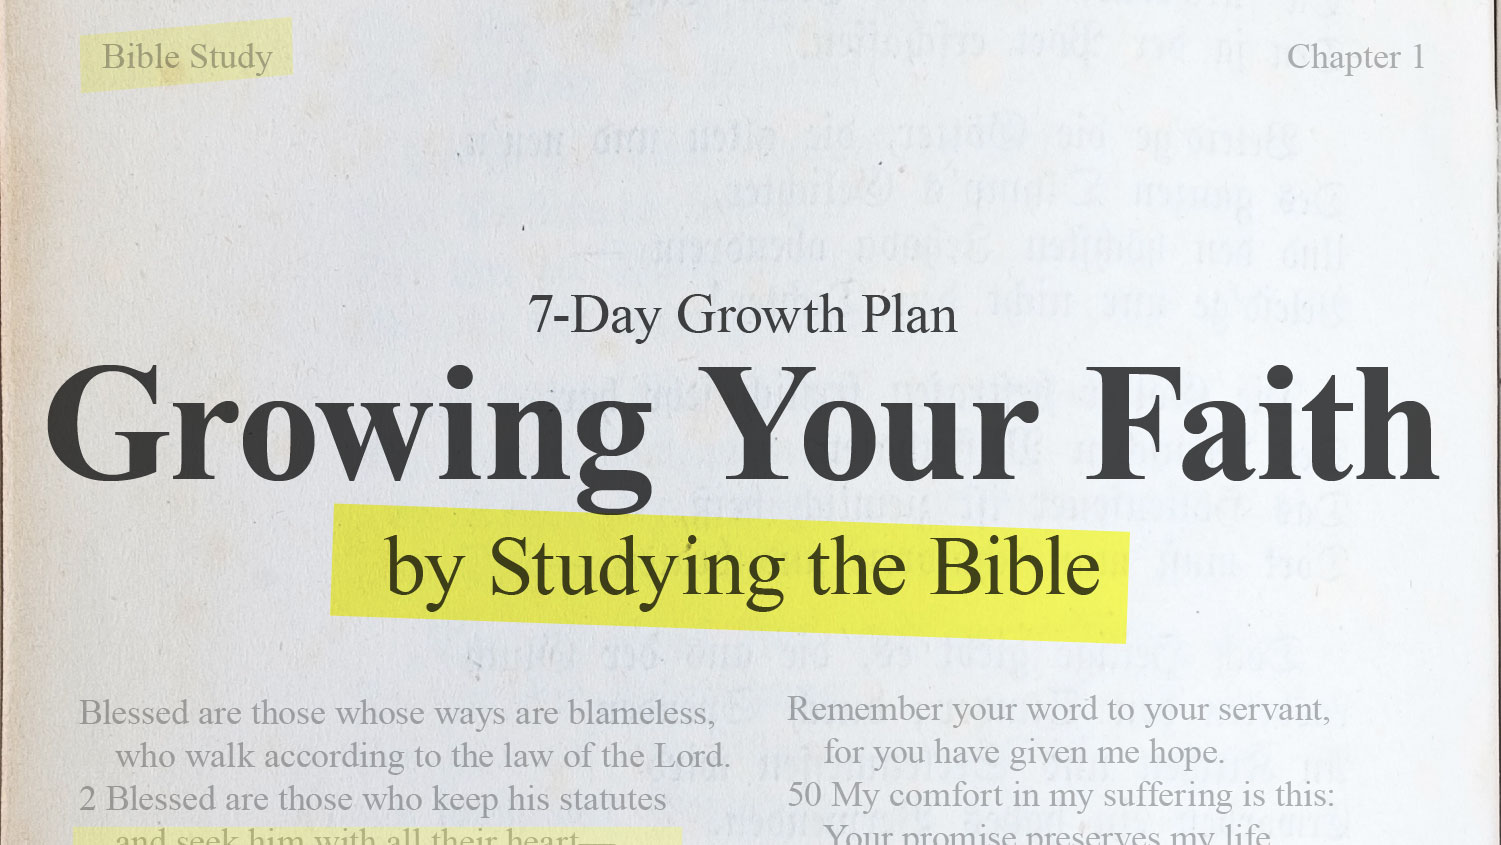 Growing Your Faith by Studying the Bible